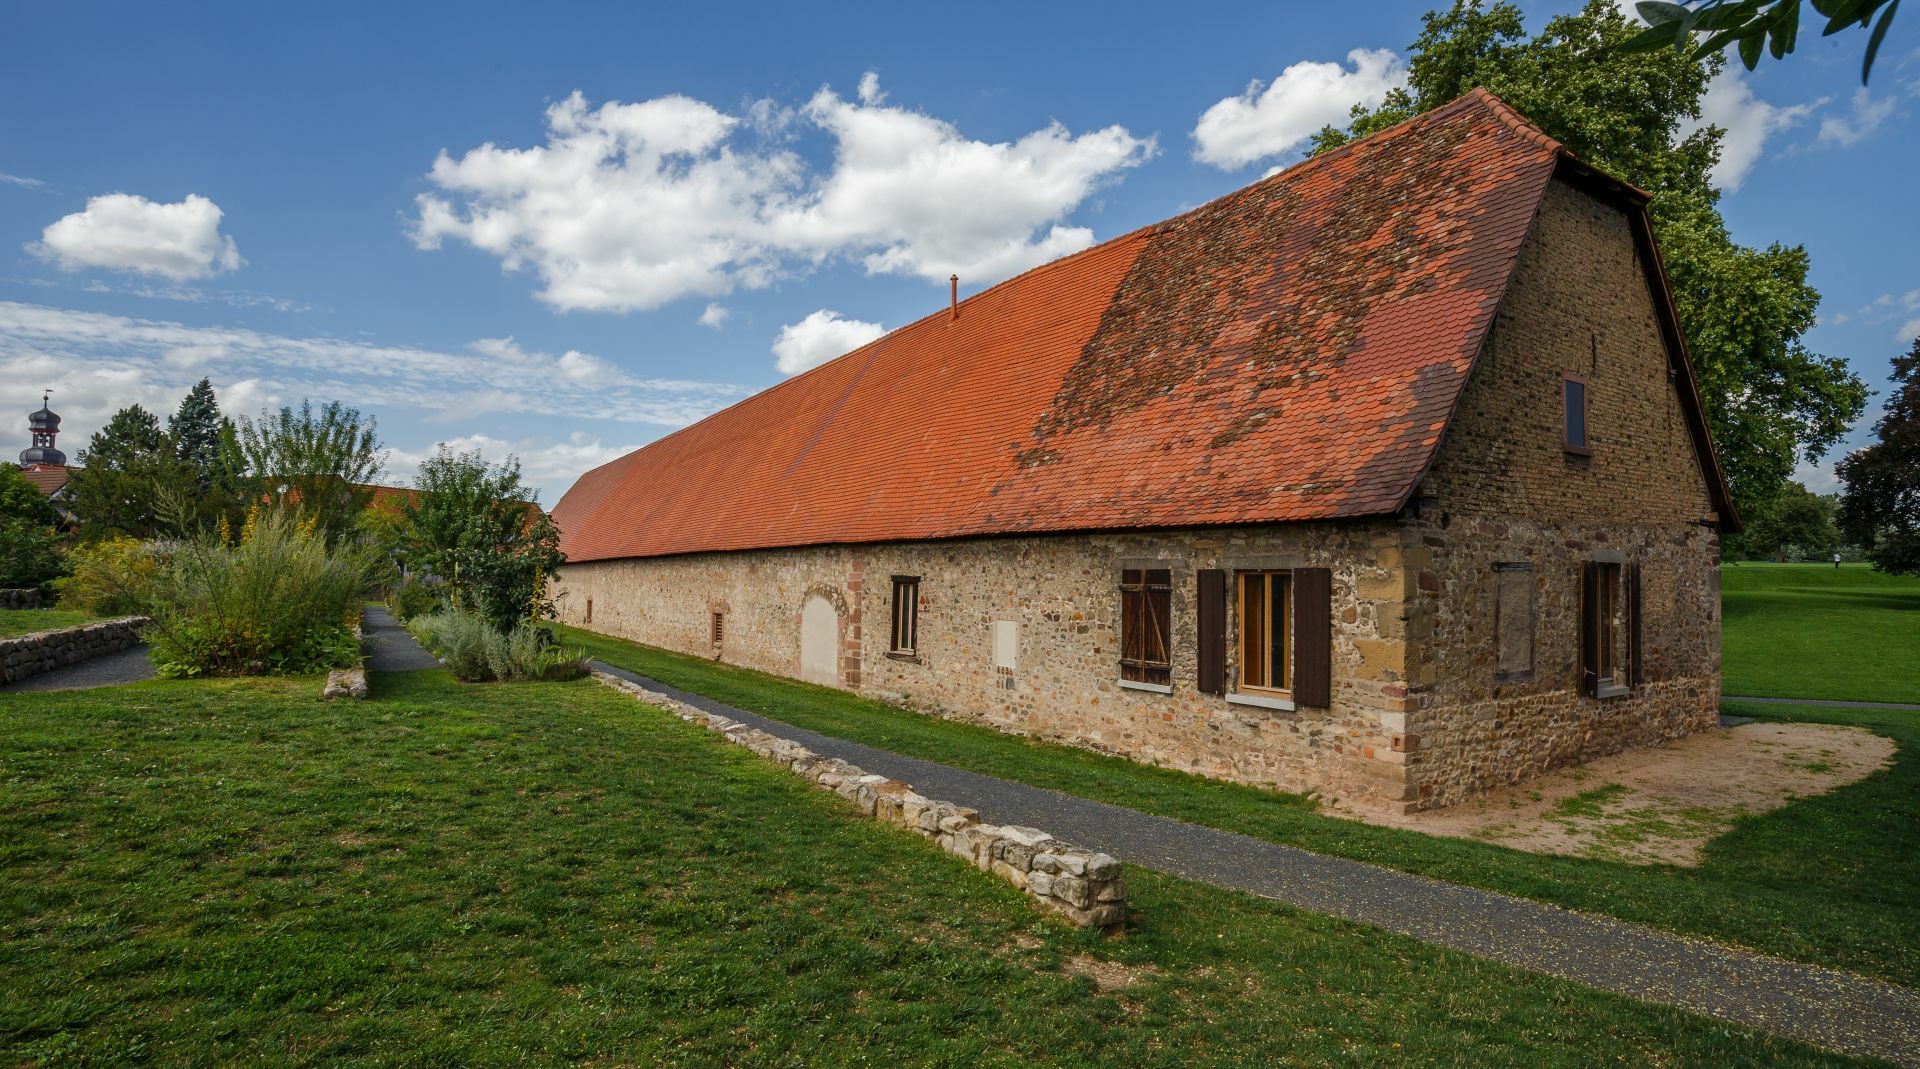 Tithe Barn from outside